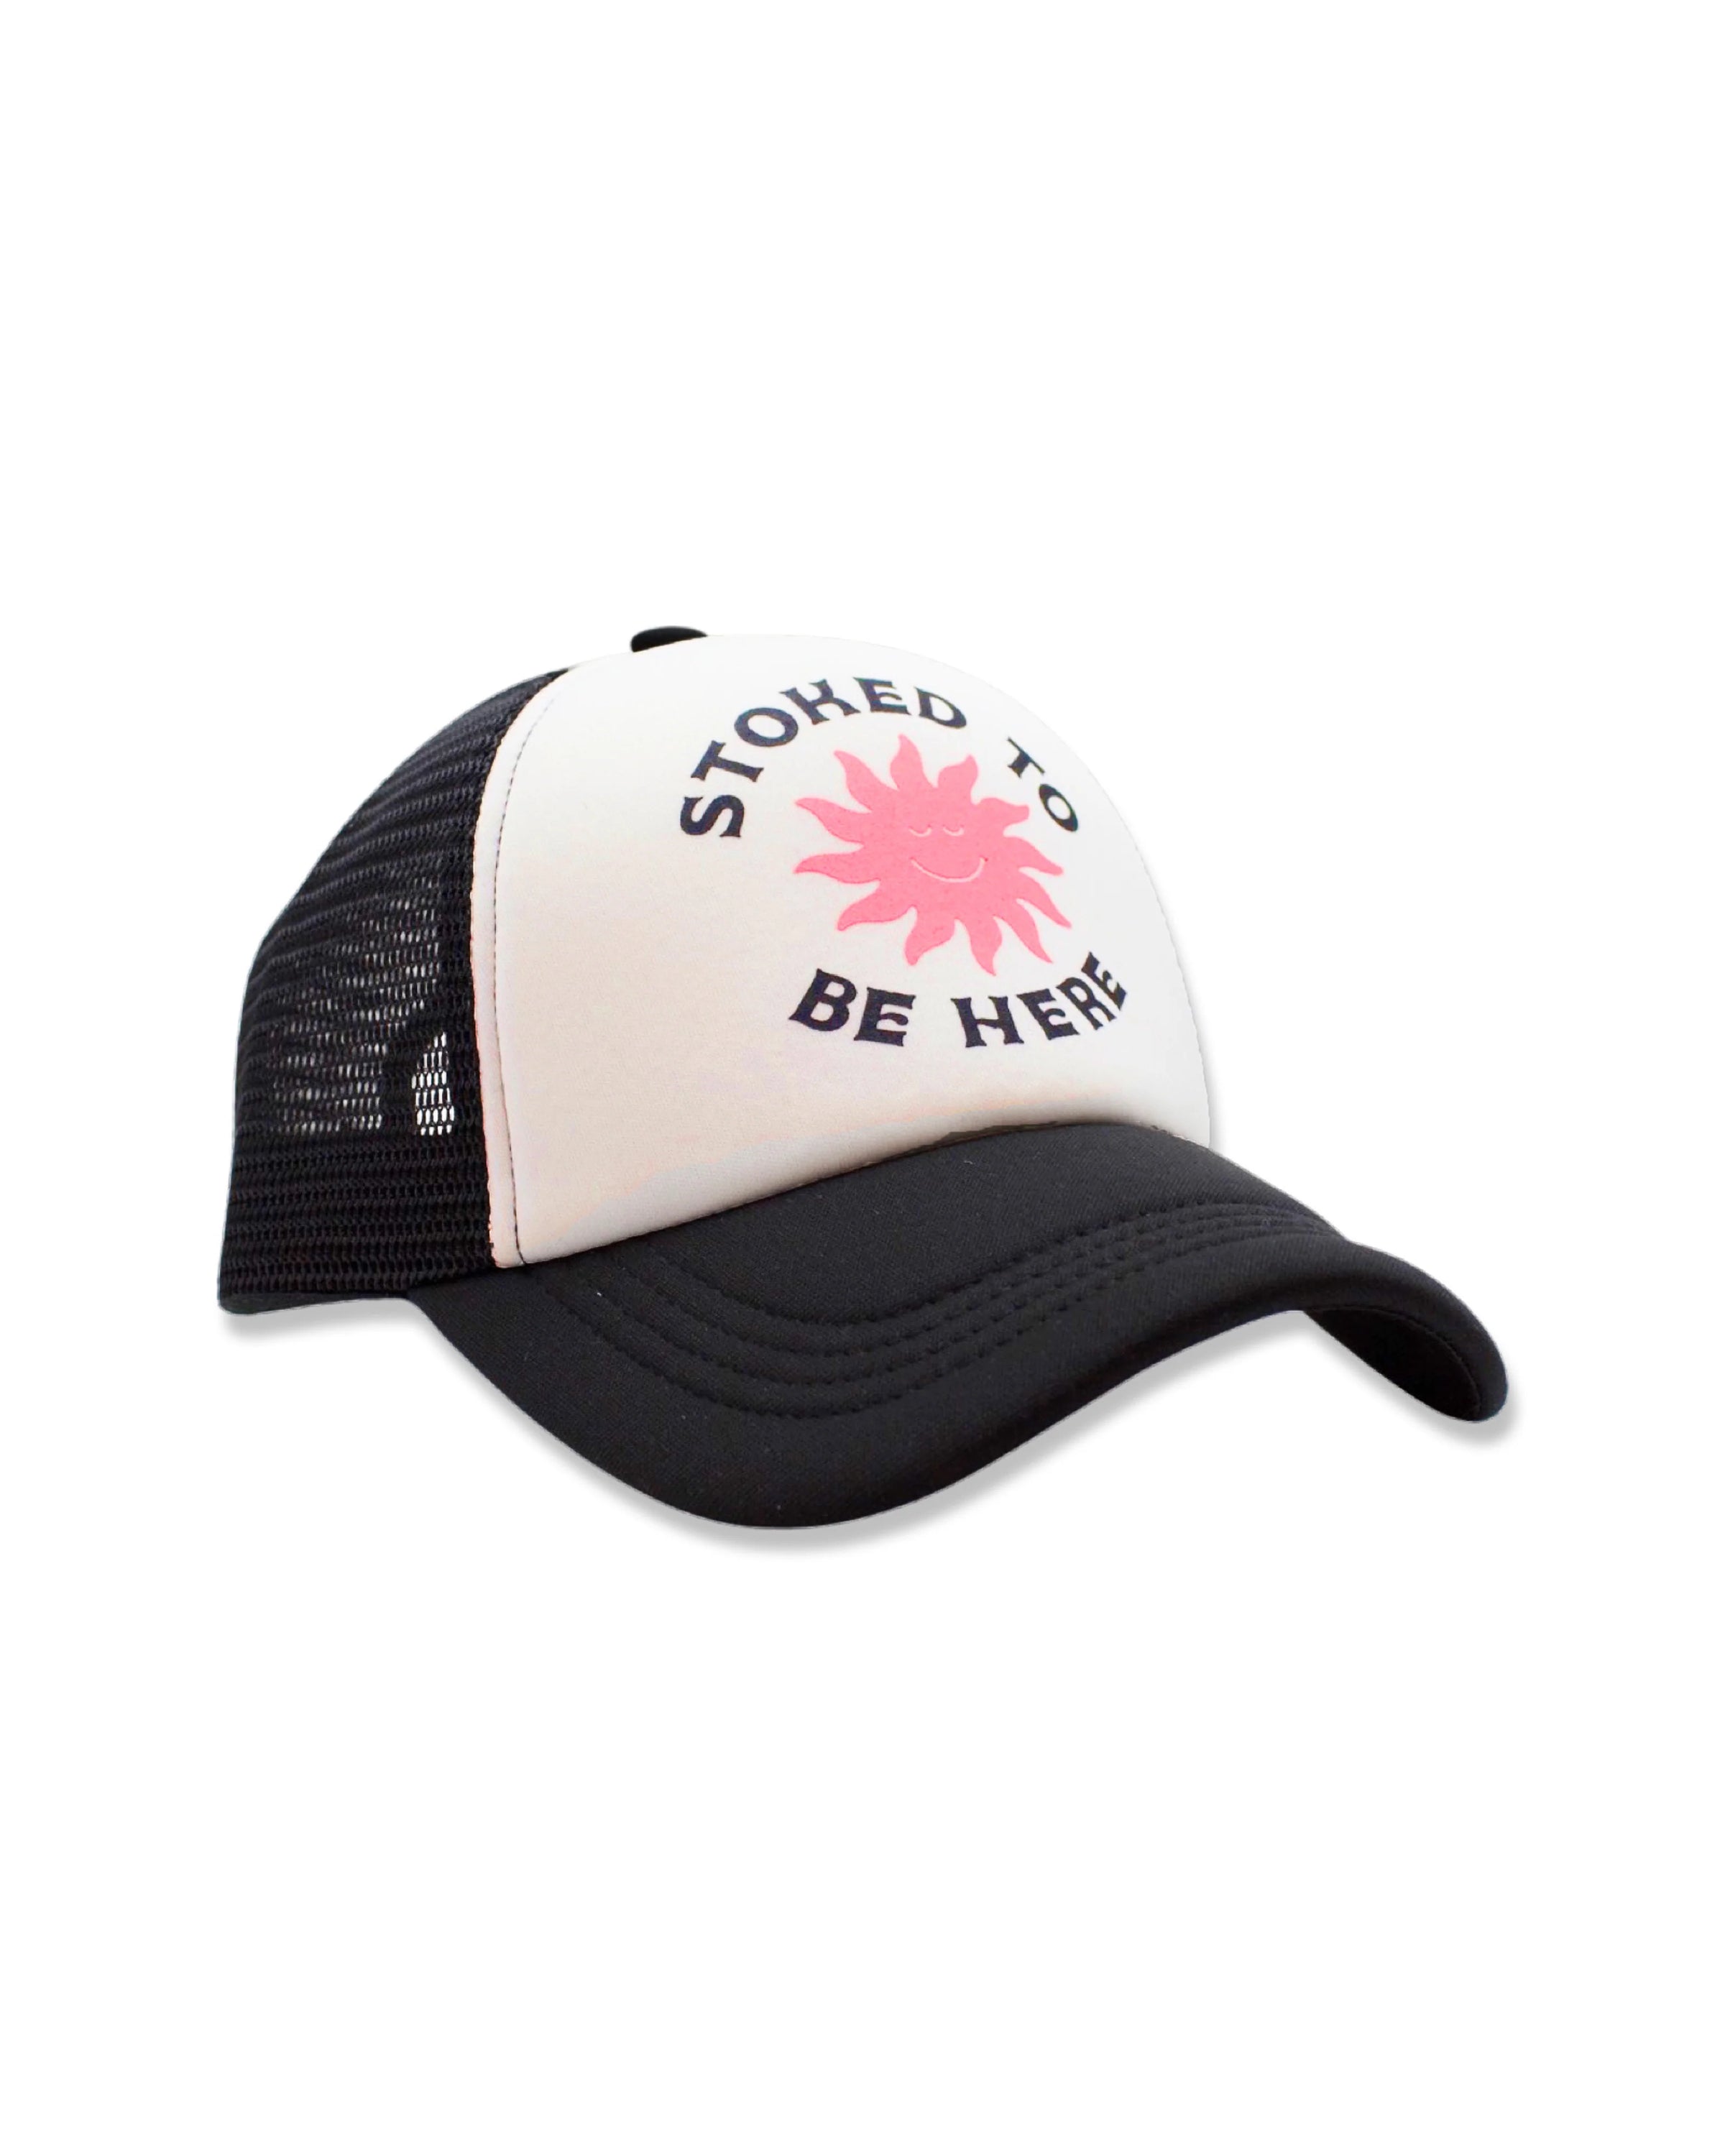 STOKED TO BE HERE TRUCKER HAT